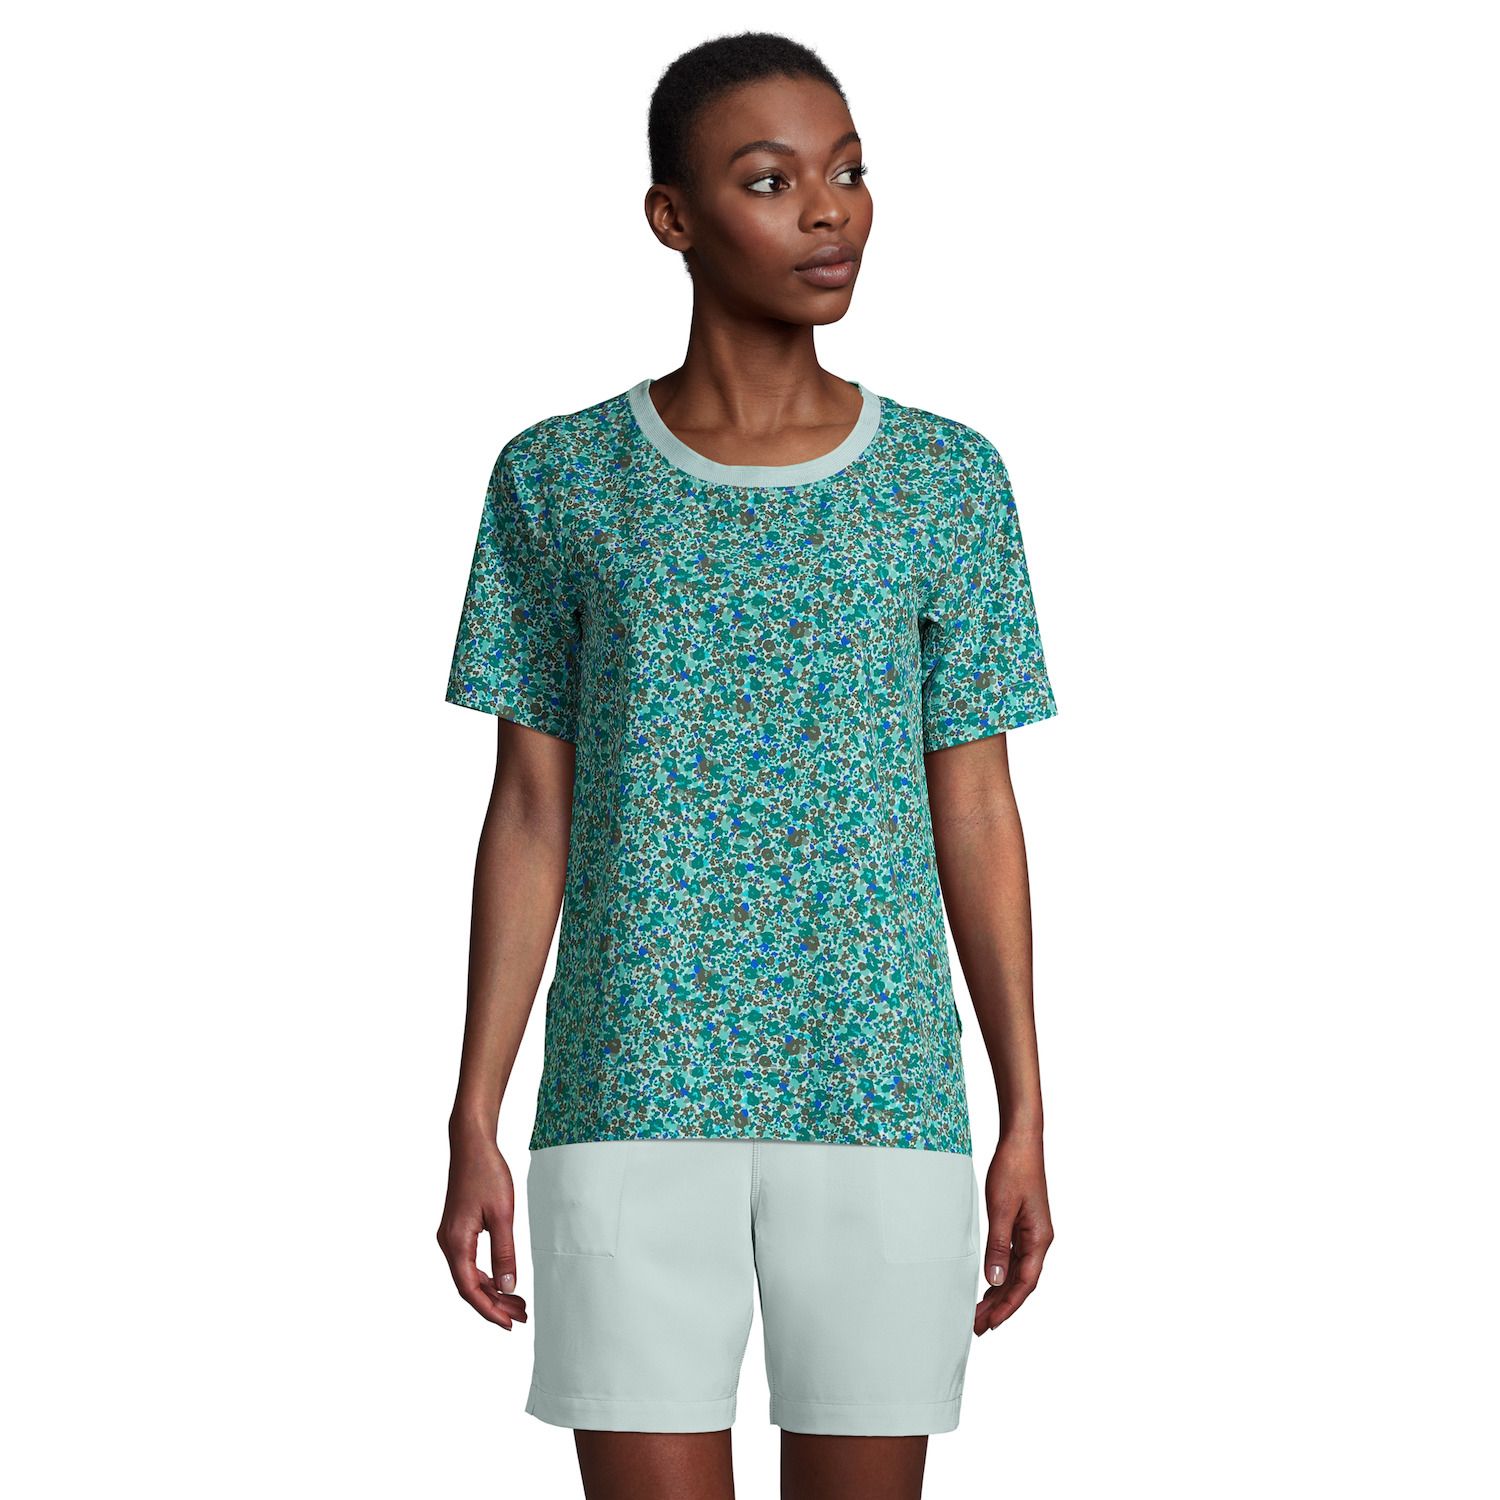 Image for Lands' End Women's 365 Commuter Elbow-Sleeve Tunic Top at Kohl's.